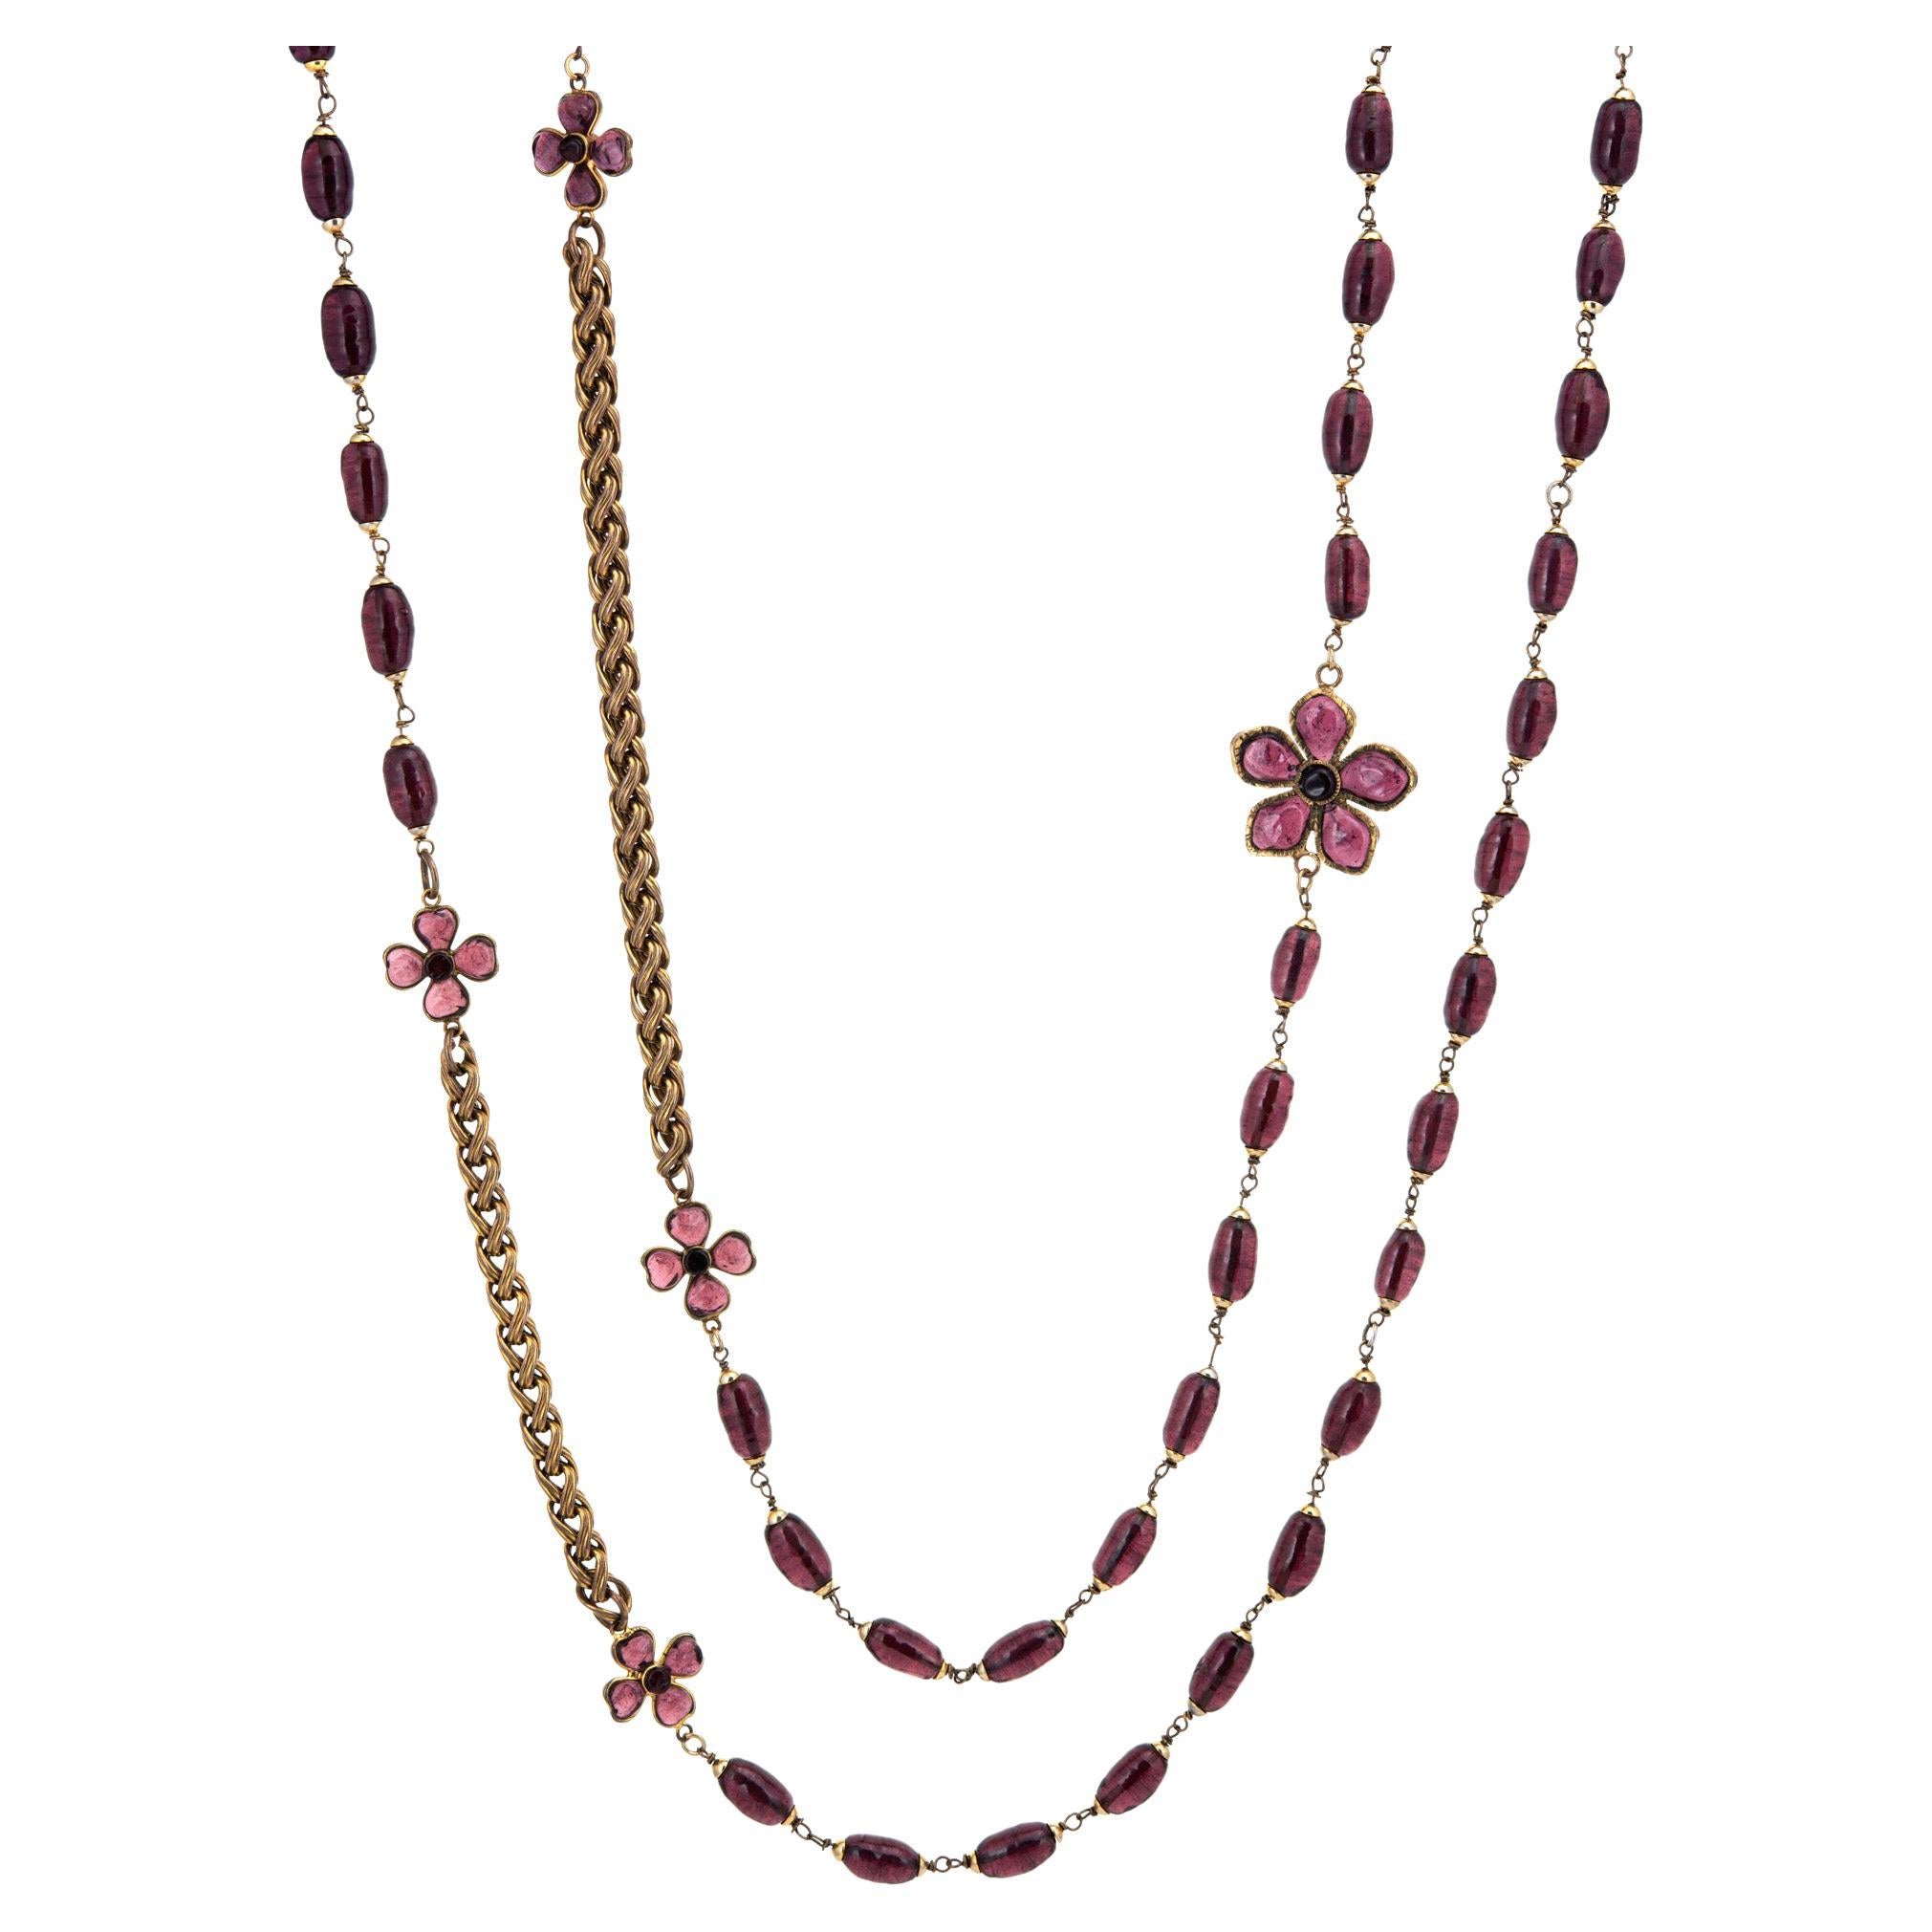 c1981 Ultra Long 105 Vintage Chanel Flower Necklace Purple Glass Beads